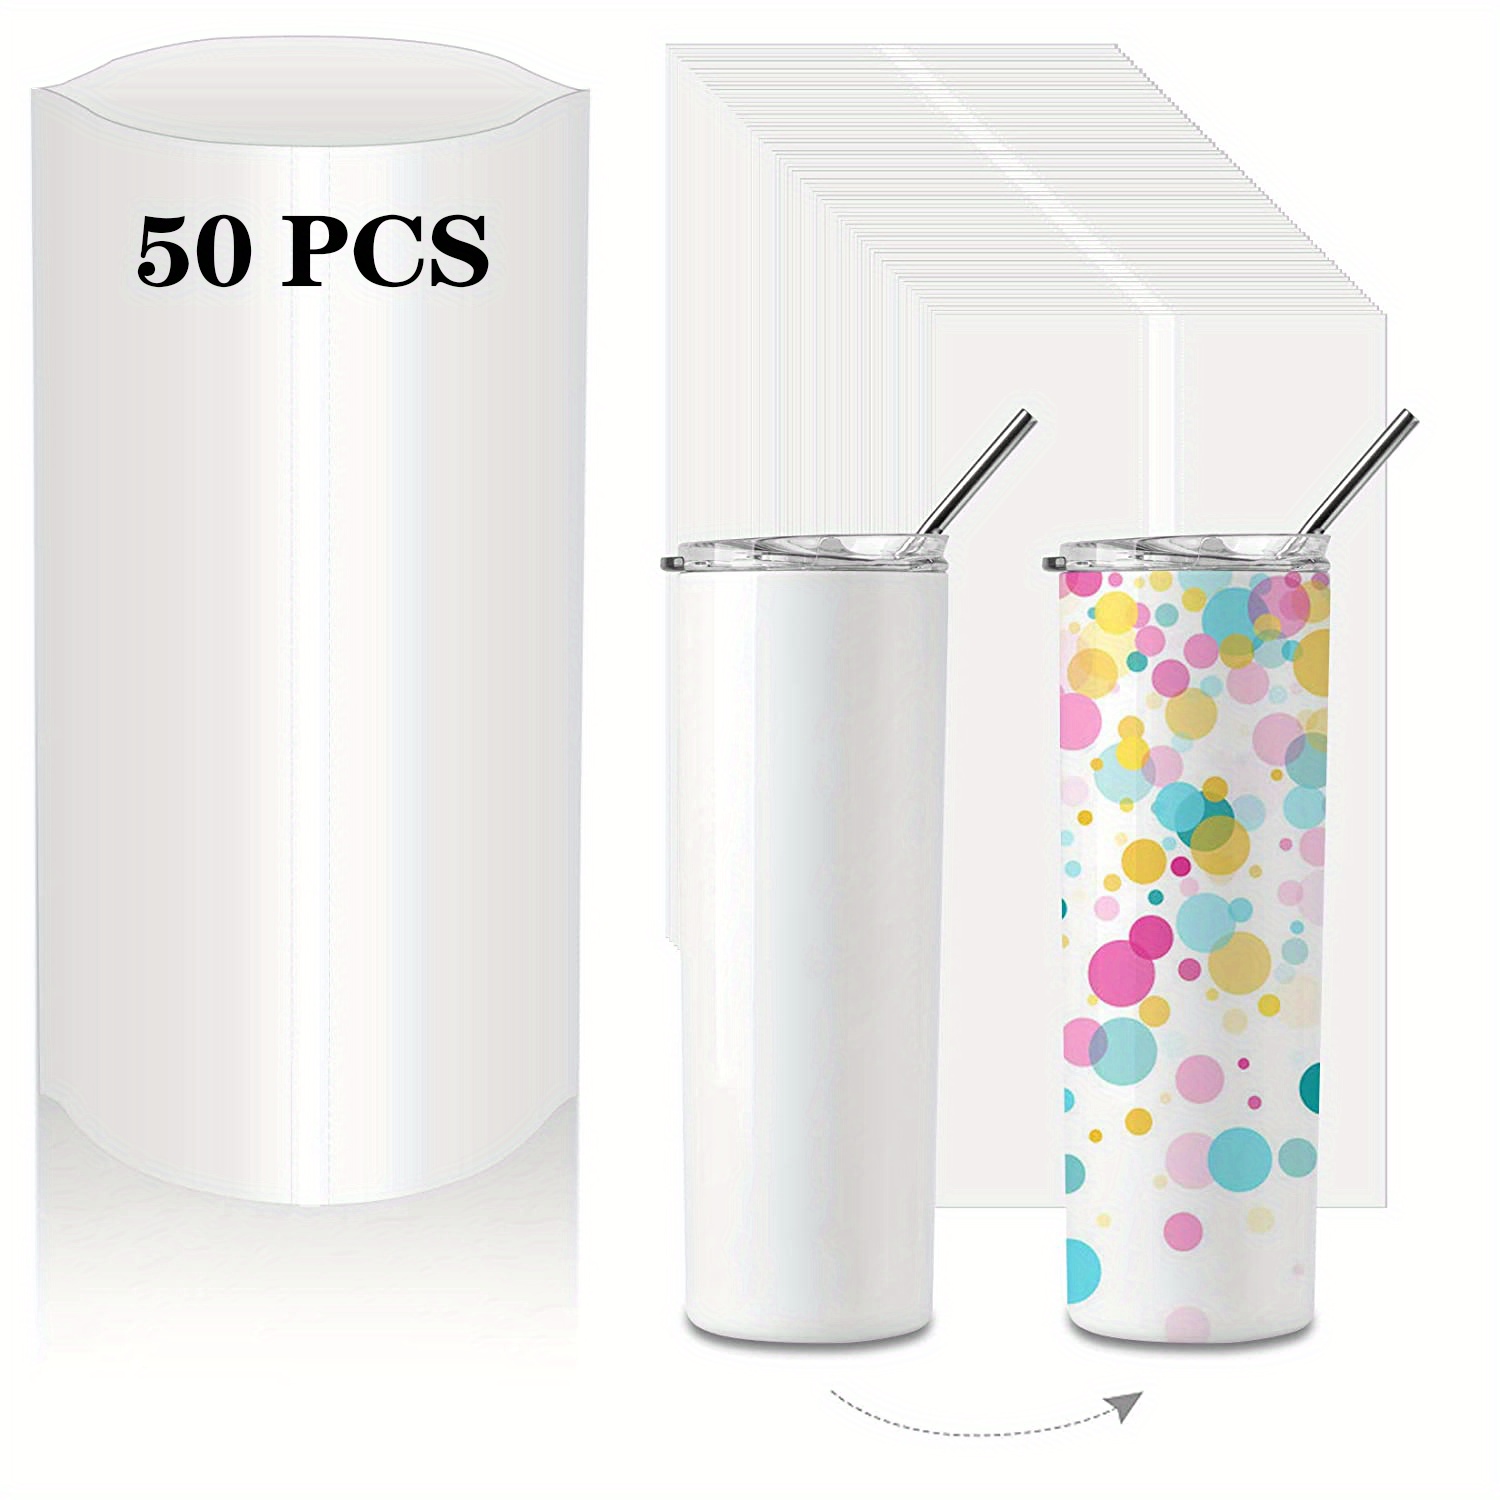 Sublimation Shrink Wrap Sleeves White Sublimation Shrink Wrap For 40oz  Blank Sublimation Tumblers Sublimation Shrink Film 180*290mm E0516 From  Factory Sale, $17.66